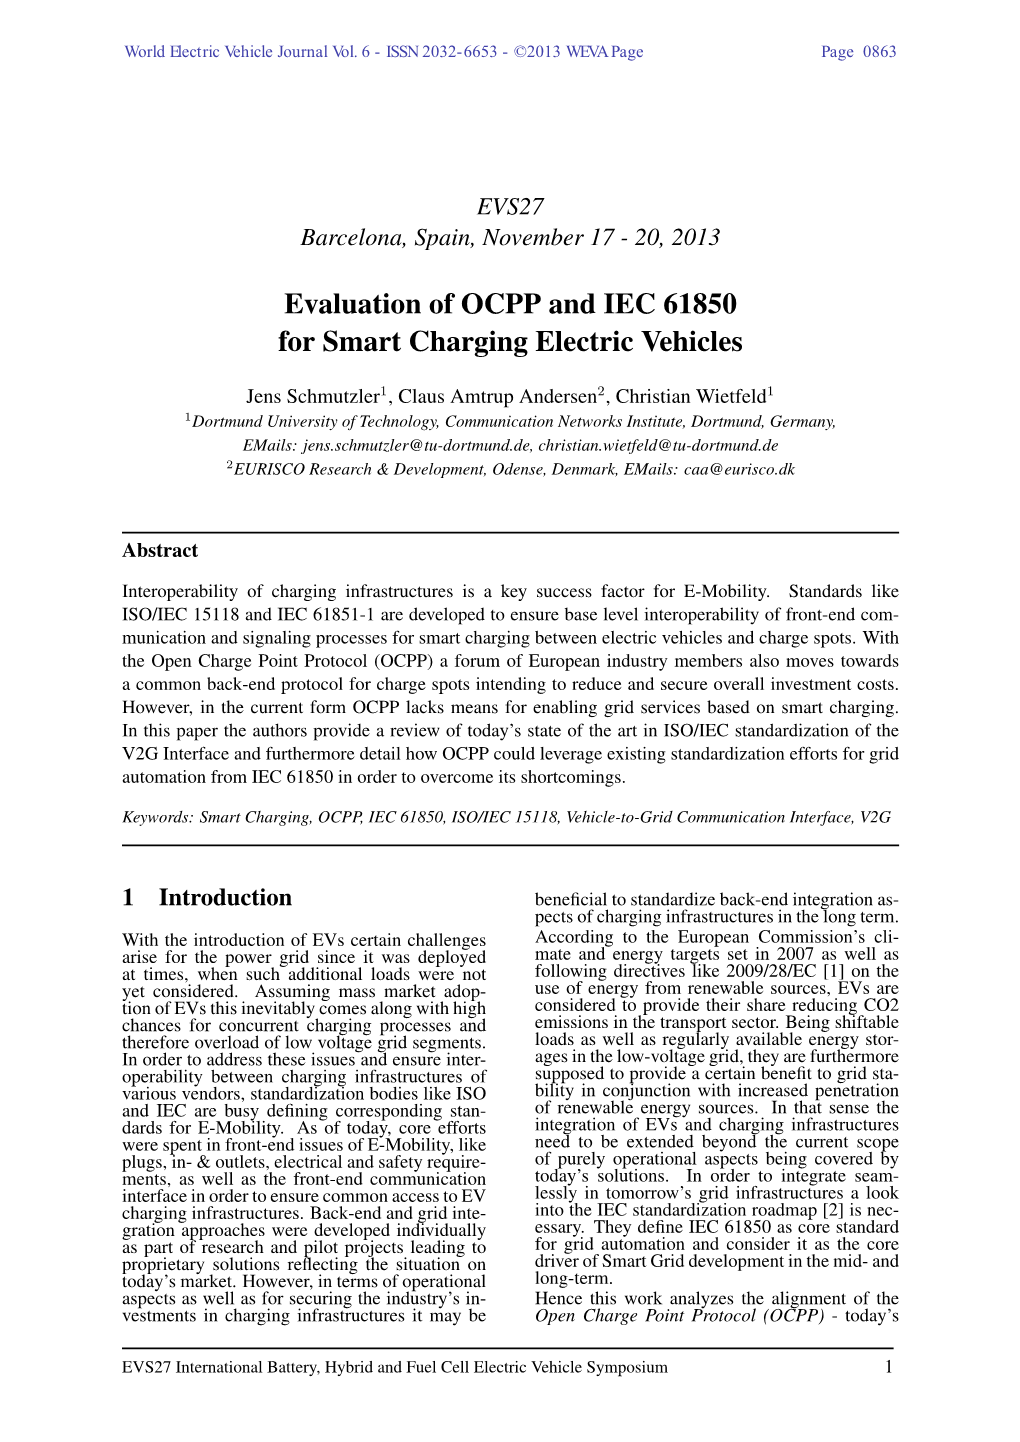 Evaluation of OCPP and IEC 61850 for Smart Charging Electric Vehicles